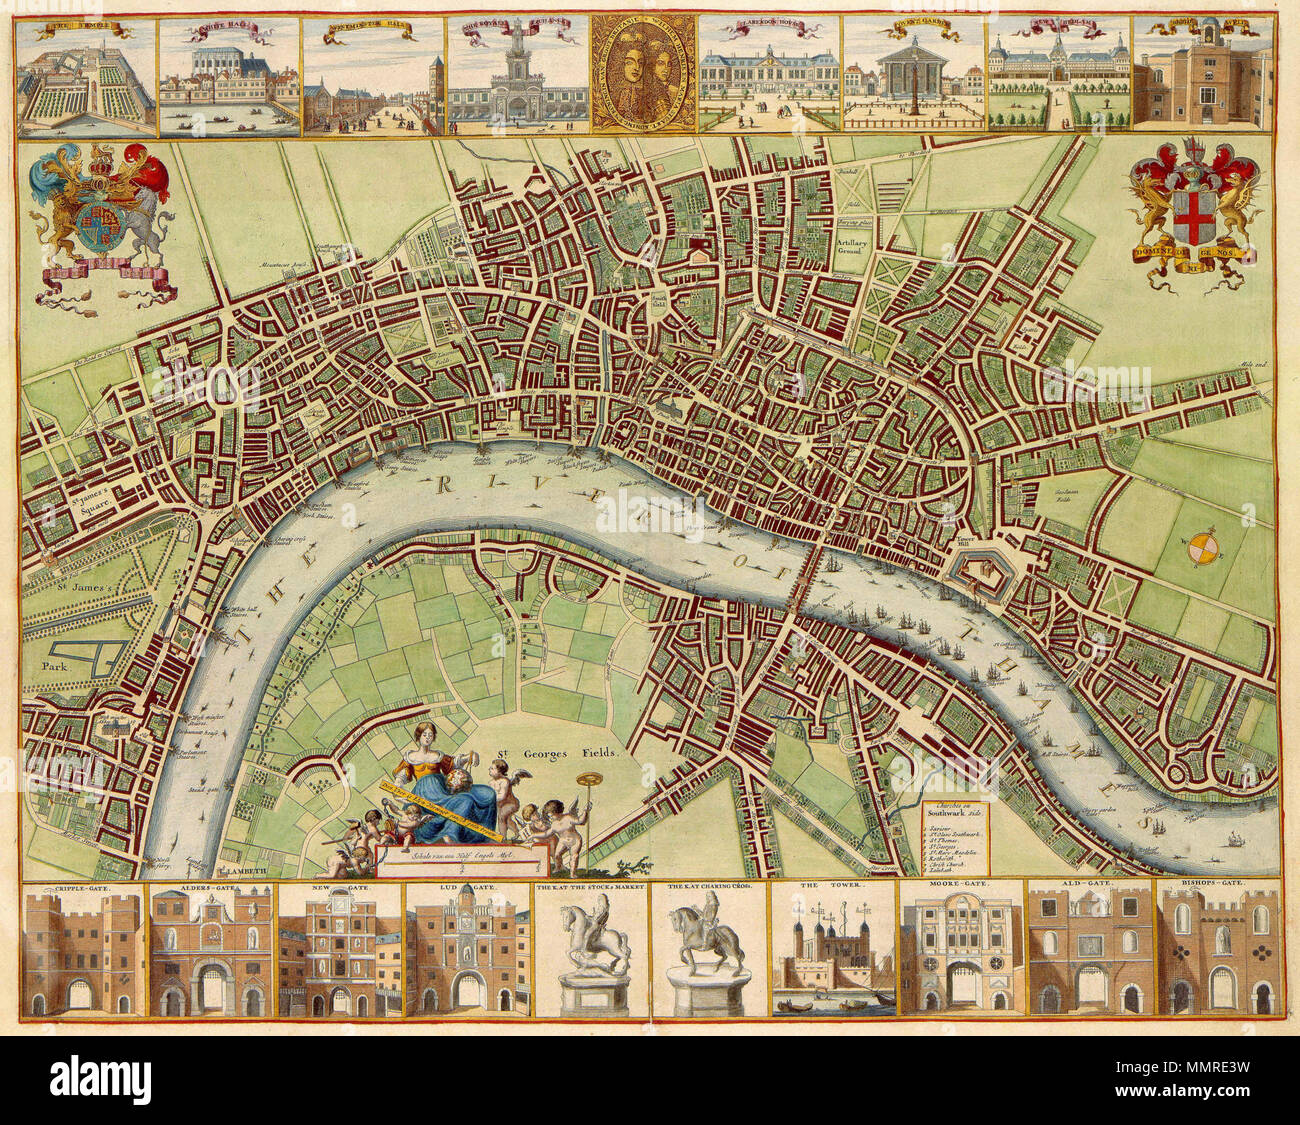 . English: 17th century map of London, originally started by W.Hollar, student of German engraver Mattheus Merian. Published in the Netherlands. It is not clear where this town plan of London was published. Judging by the double portrait at the top, the map was published after Parliament installed joint monarchs William III and Mary Stuart in 1689. The map was composed by the famous designer and engraver from Prague Wenceslaus Hollar (1607-1677). He adopted, and excelled in, a style best suited to chorography or delineation of cities. He received instructions from Mattheus Merian (1593-1650) i Stock Photo